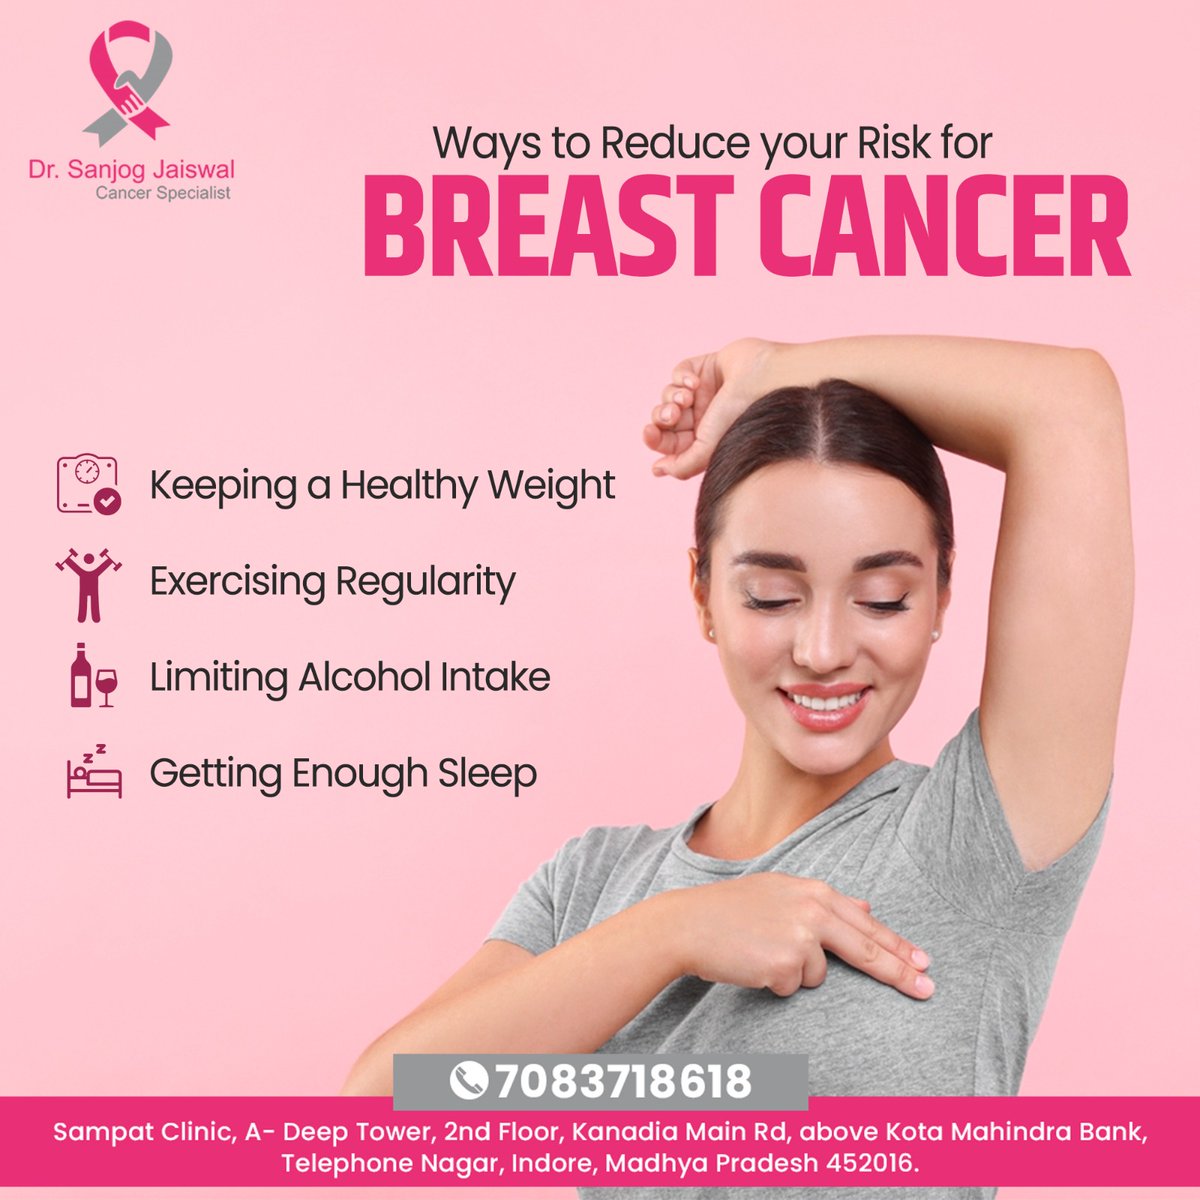 🌟 Reduce your risk for breast cancer by maintaining a healthy weight, exercising regularly, limiting alcohol intake, and getting enough sleep. 
visit: advancecancercare.com/our-services/b…
.
.
.
#breastcancer #breastcancerawareness #breastcancertreatment #breastcancersurvivor